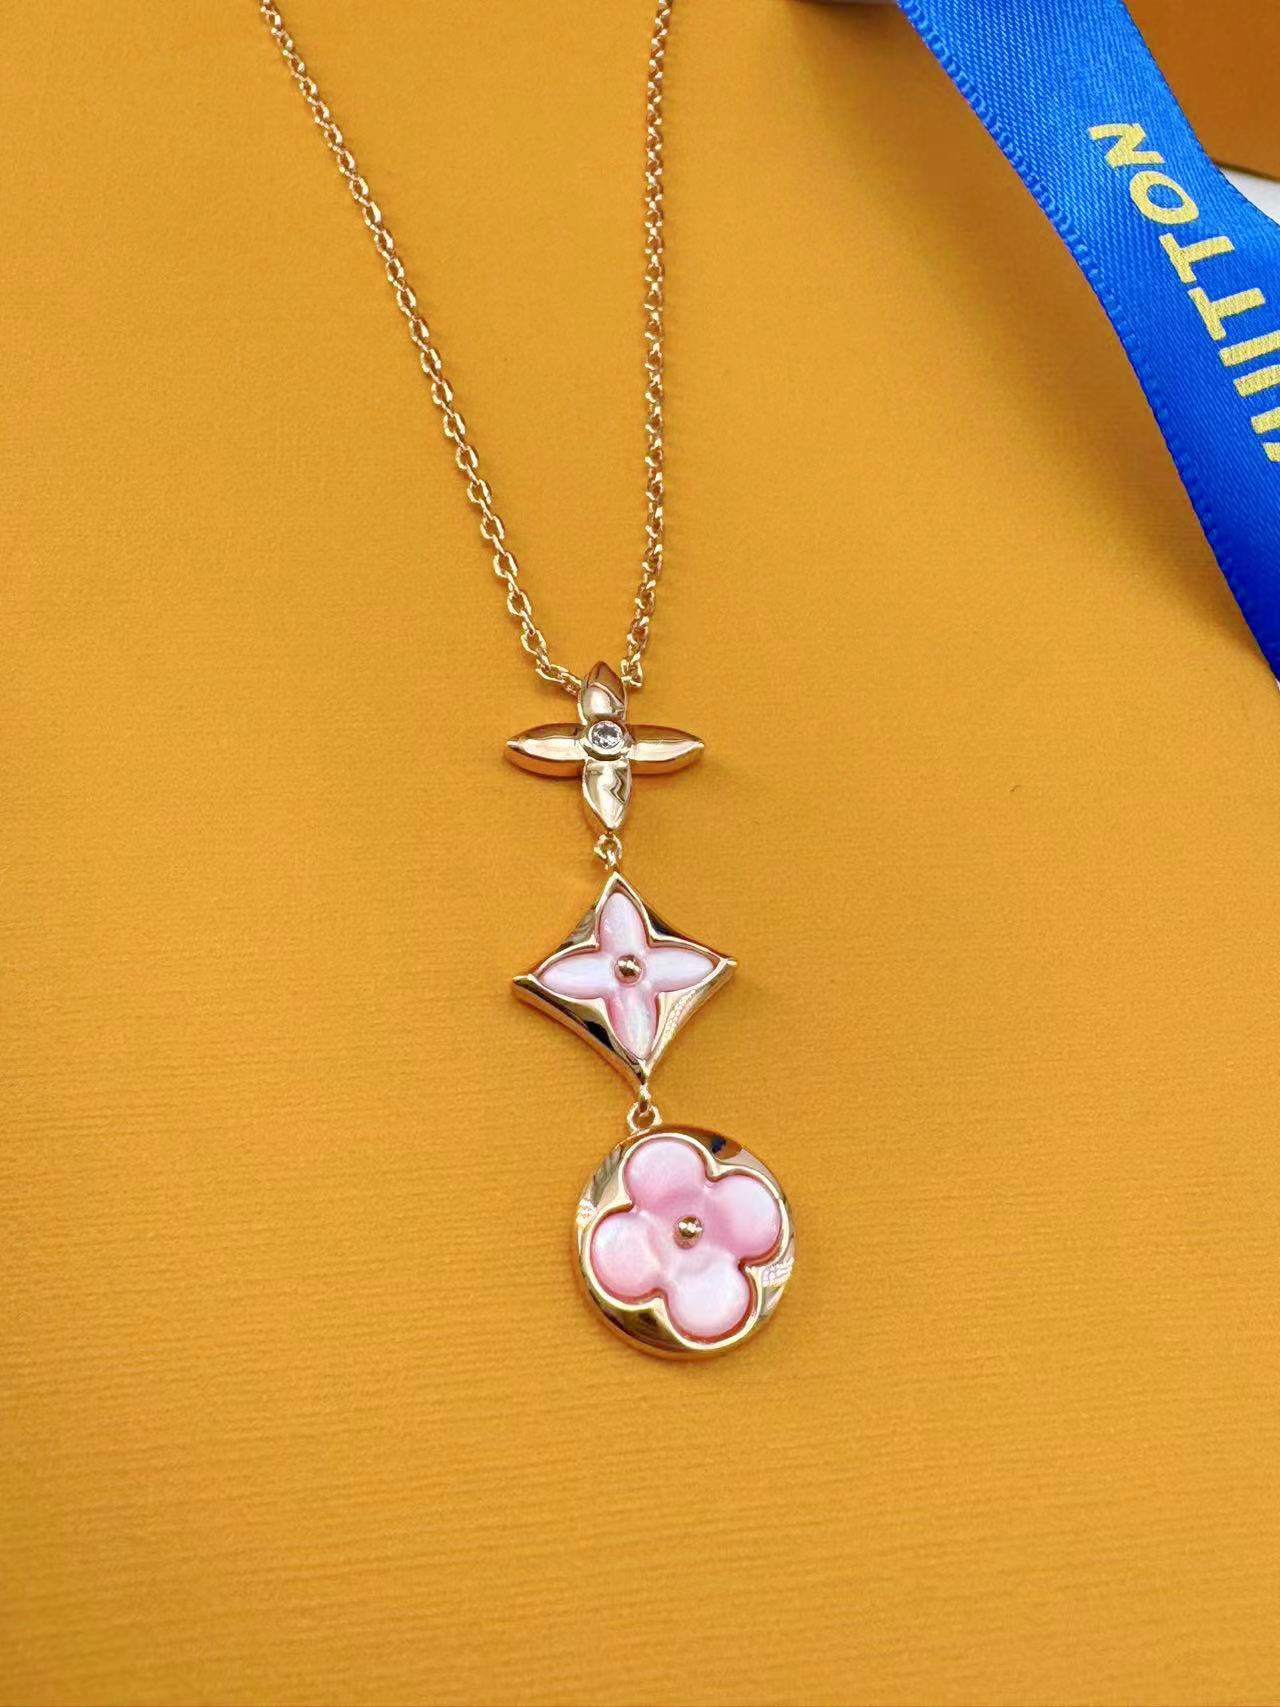 Louis Vuitton Jewelry Necklaces & Pendants Pink Rose Gold White Fashion